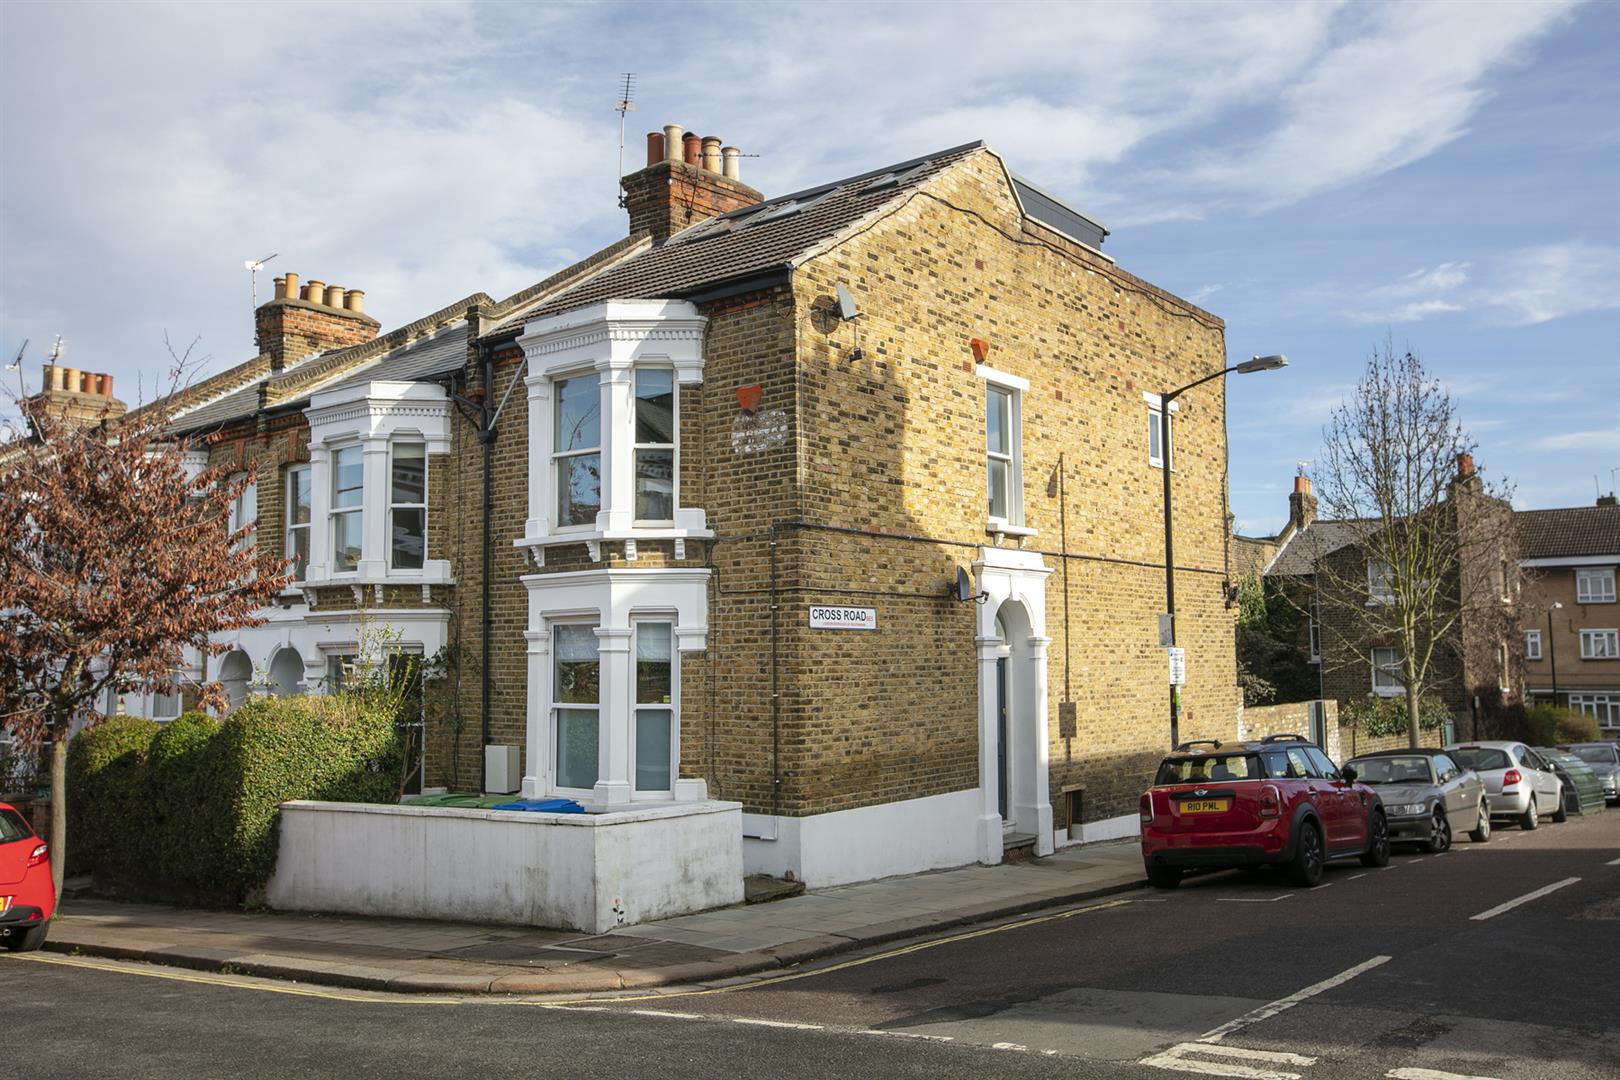 Flat - Conversion For Sale in Shenley Road, London, SE5 782 view3